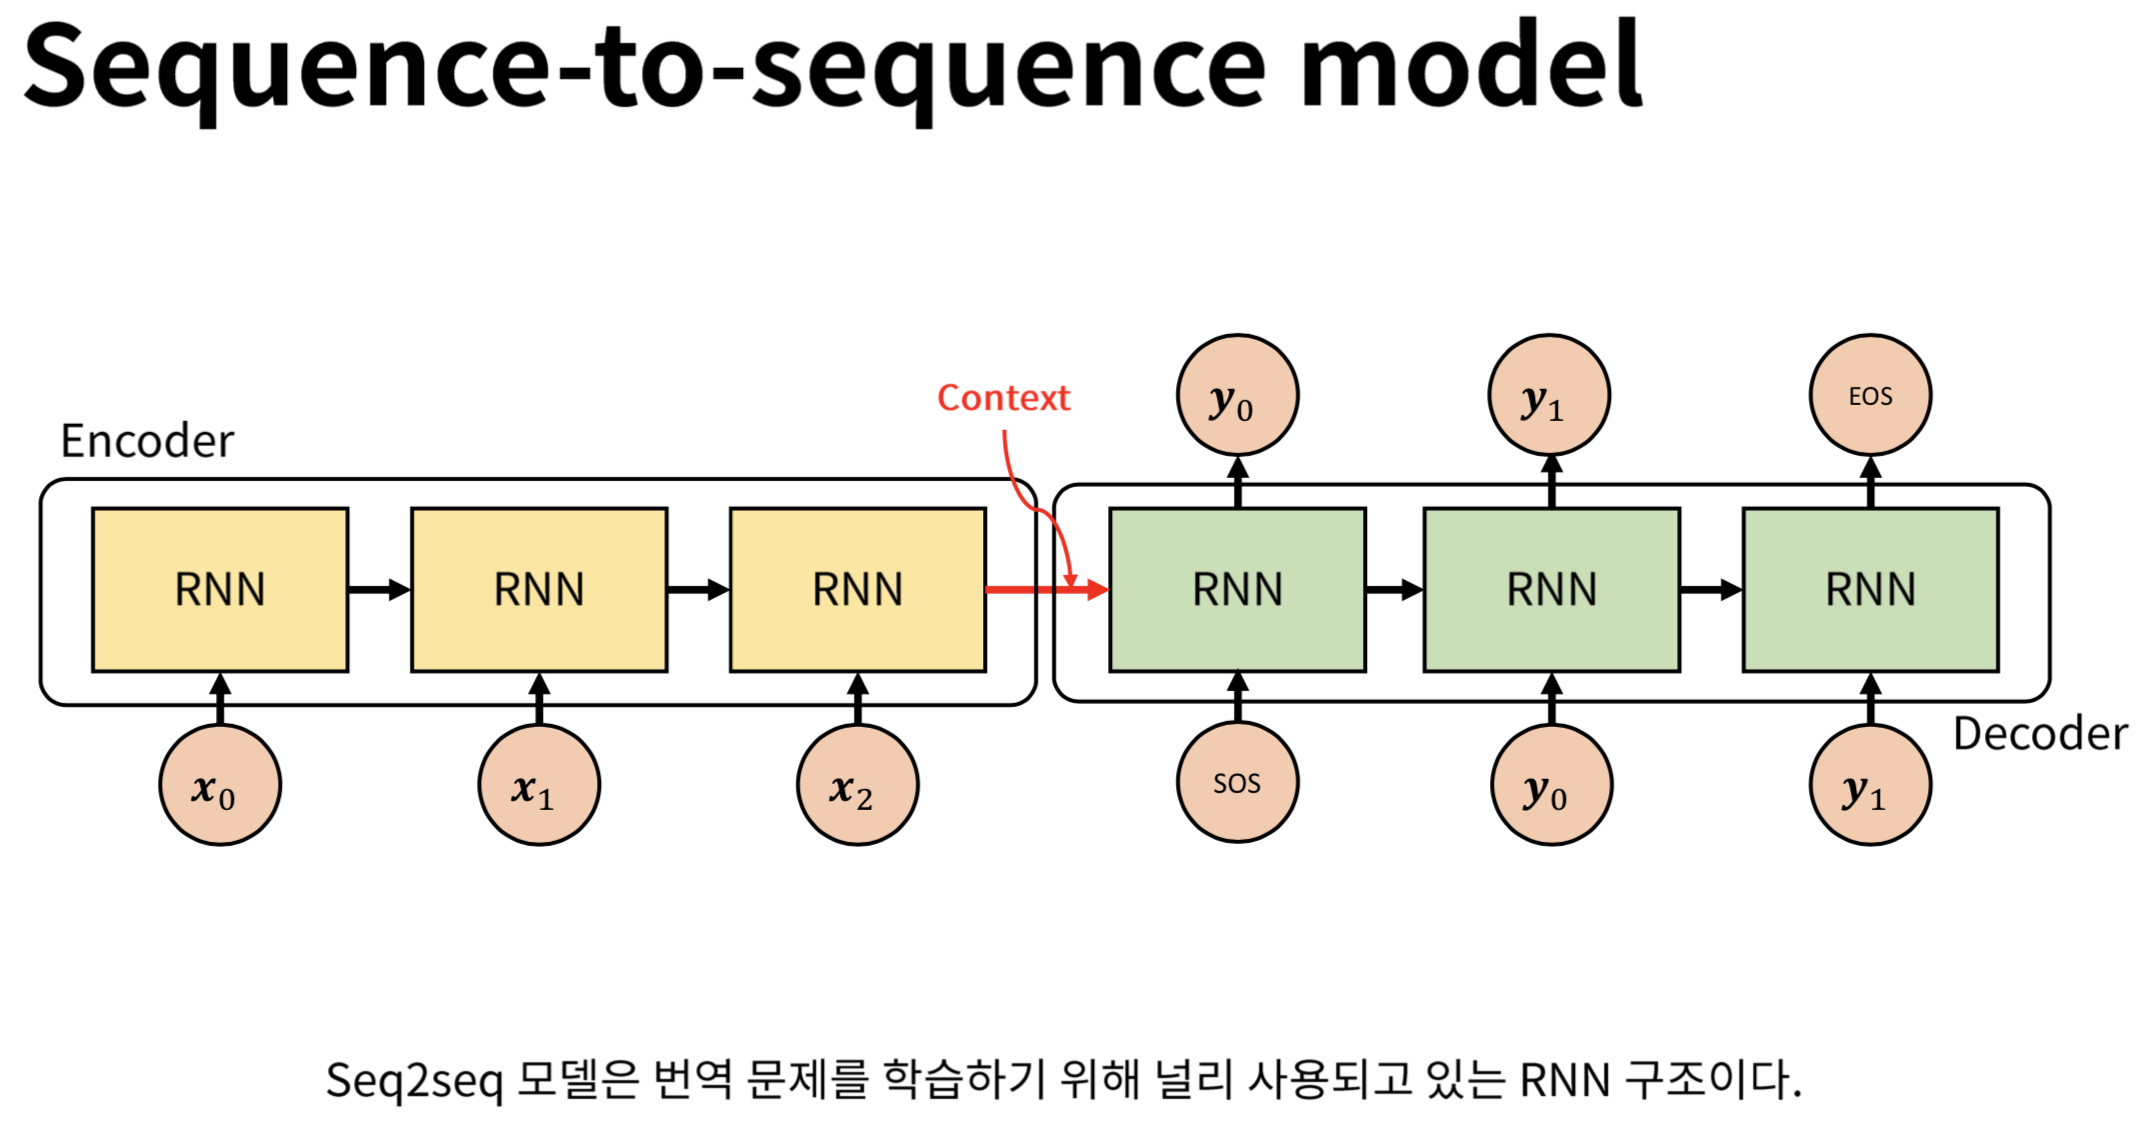 Sequence-to-sequence